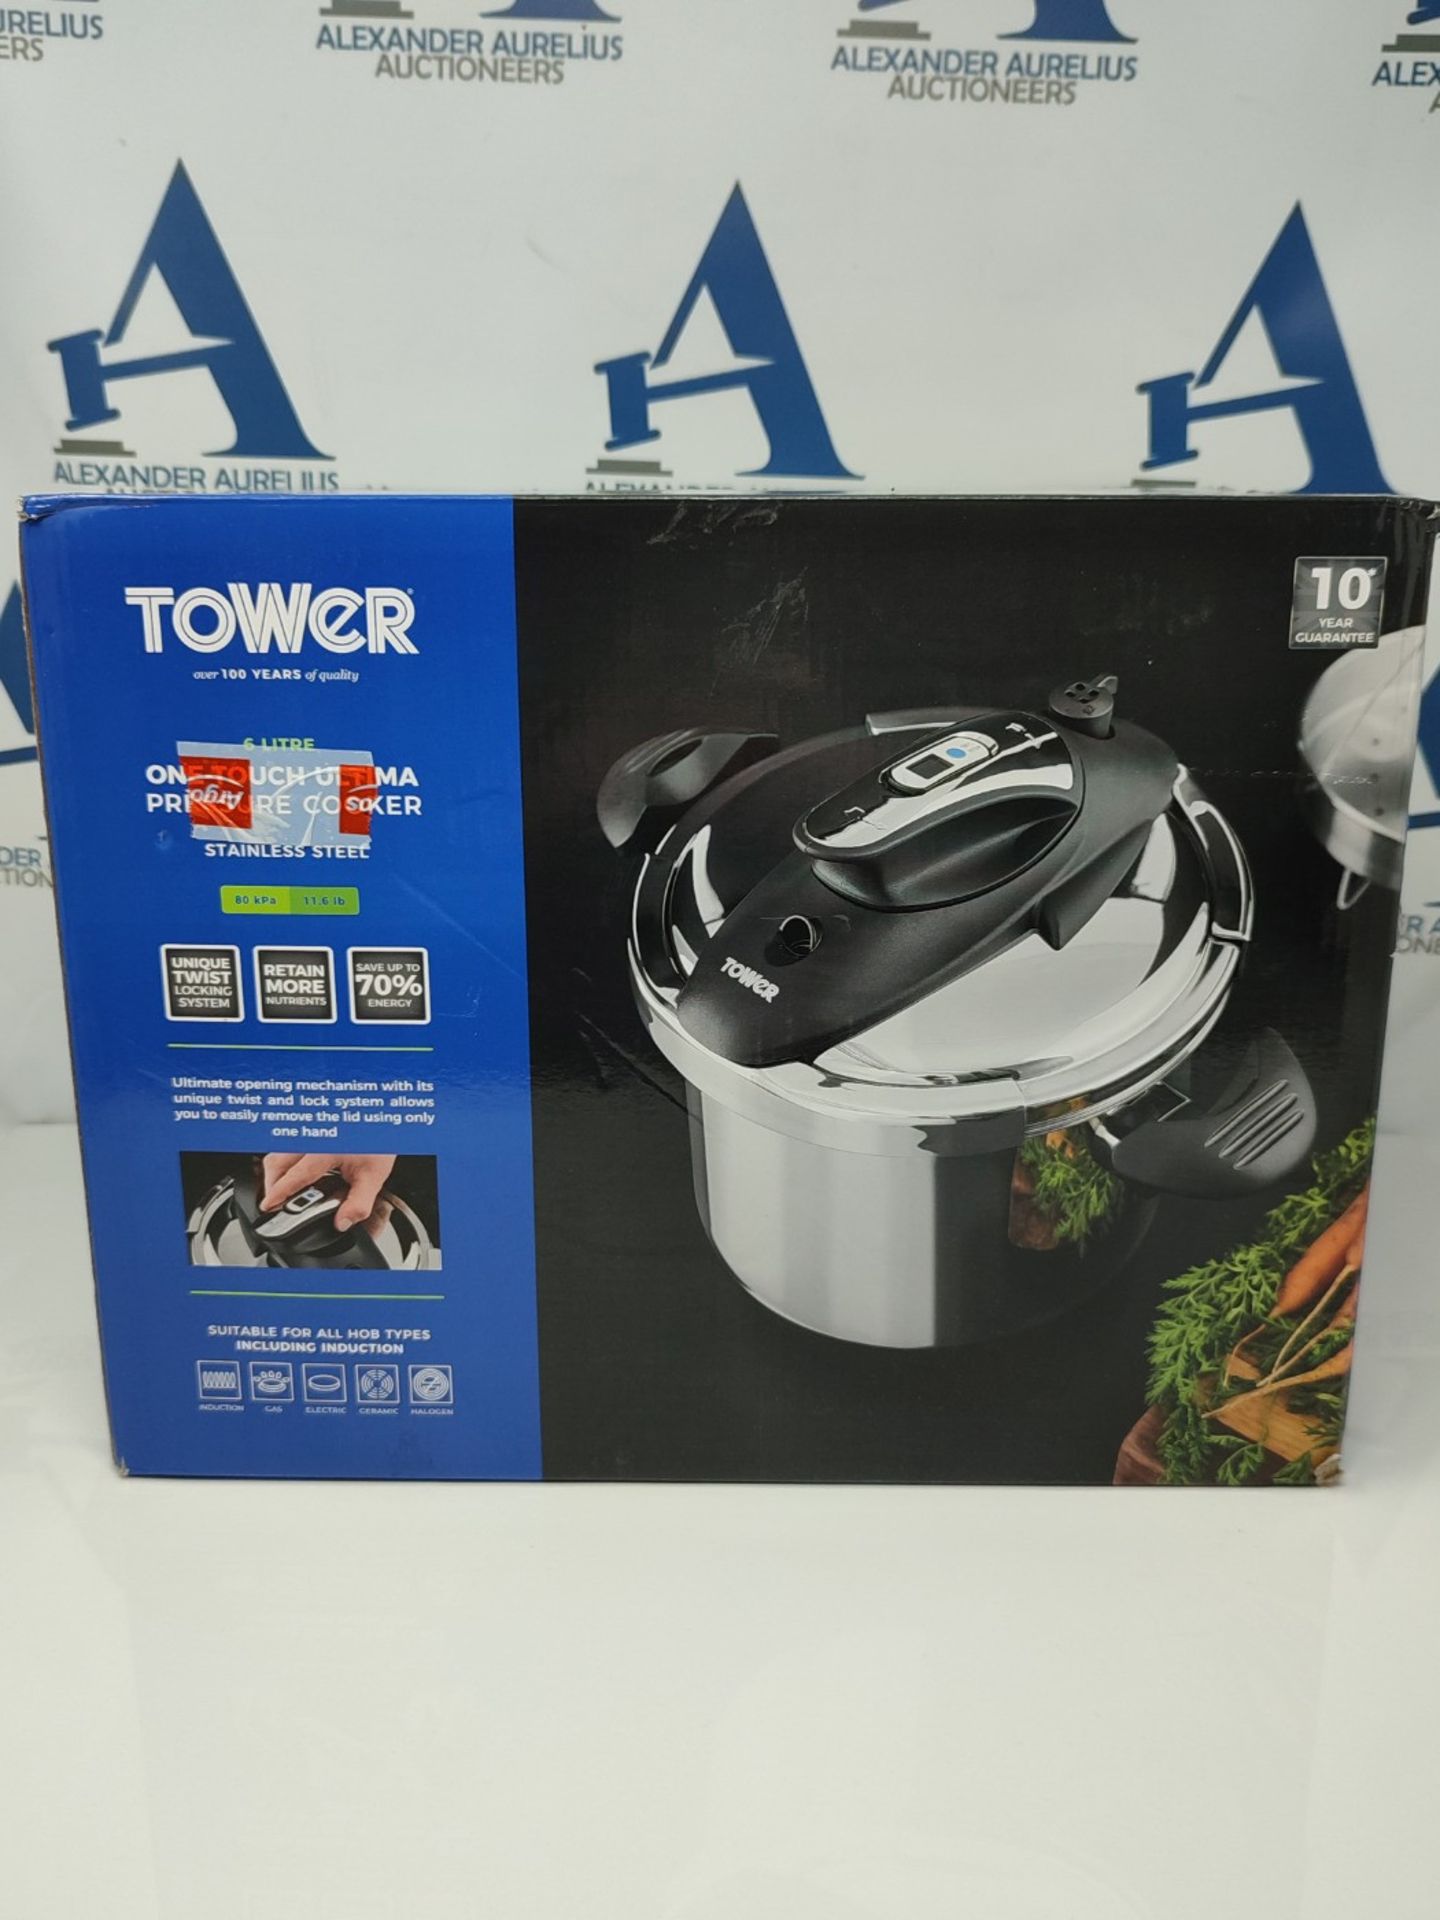 RRP £54.00 Tower T80244 Pressure Cooker with Steamer Basket, Stainless Steel, 6 Litre , Silver - Image 2 of 3